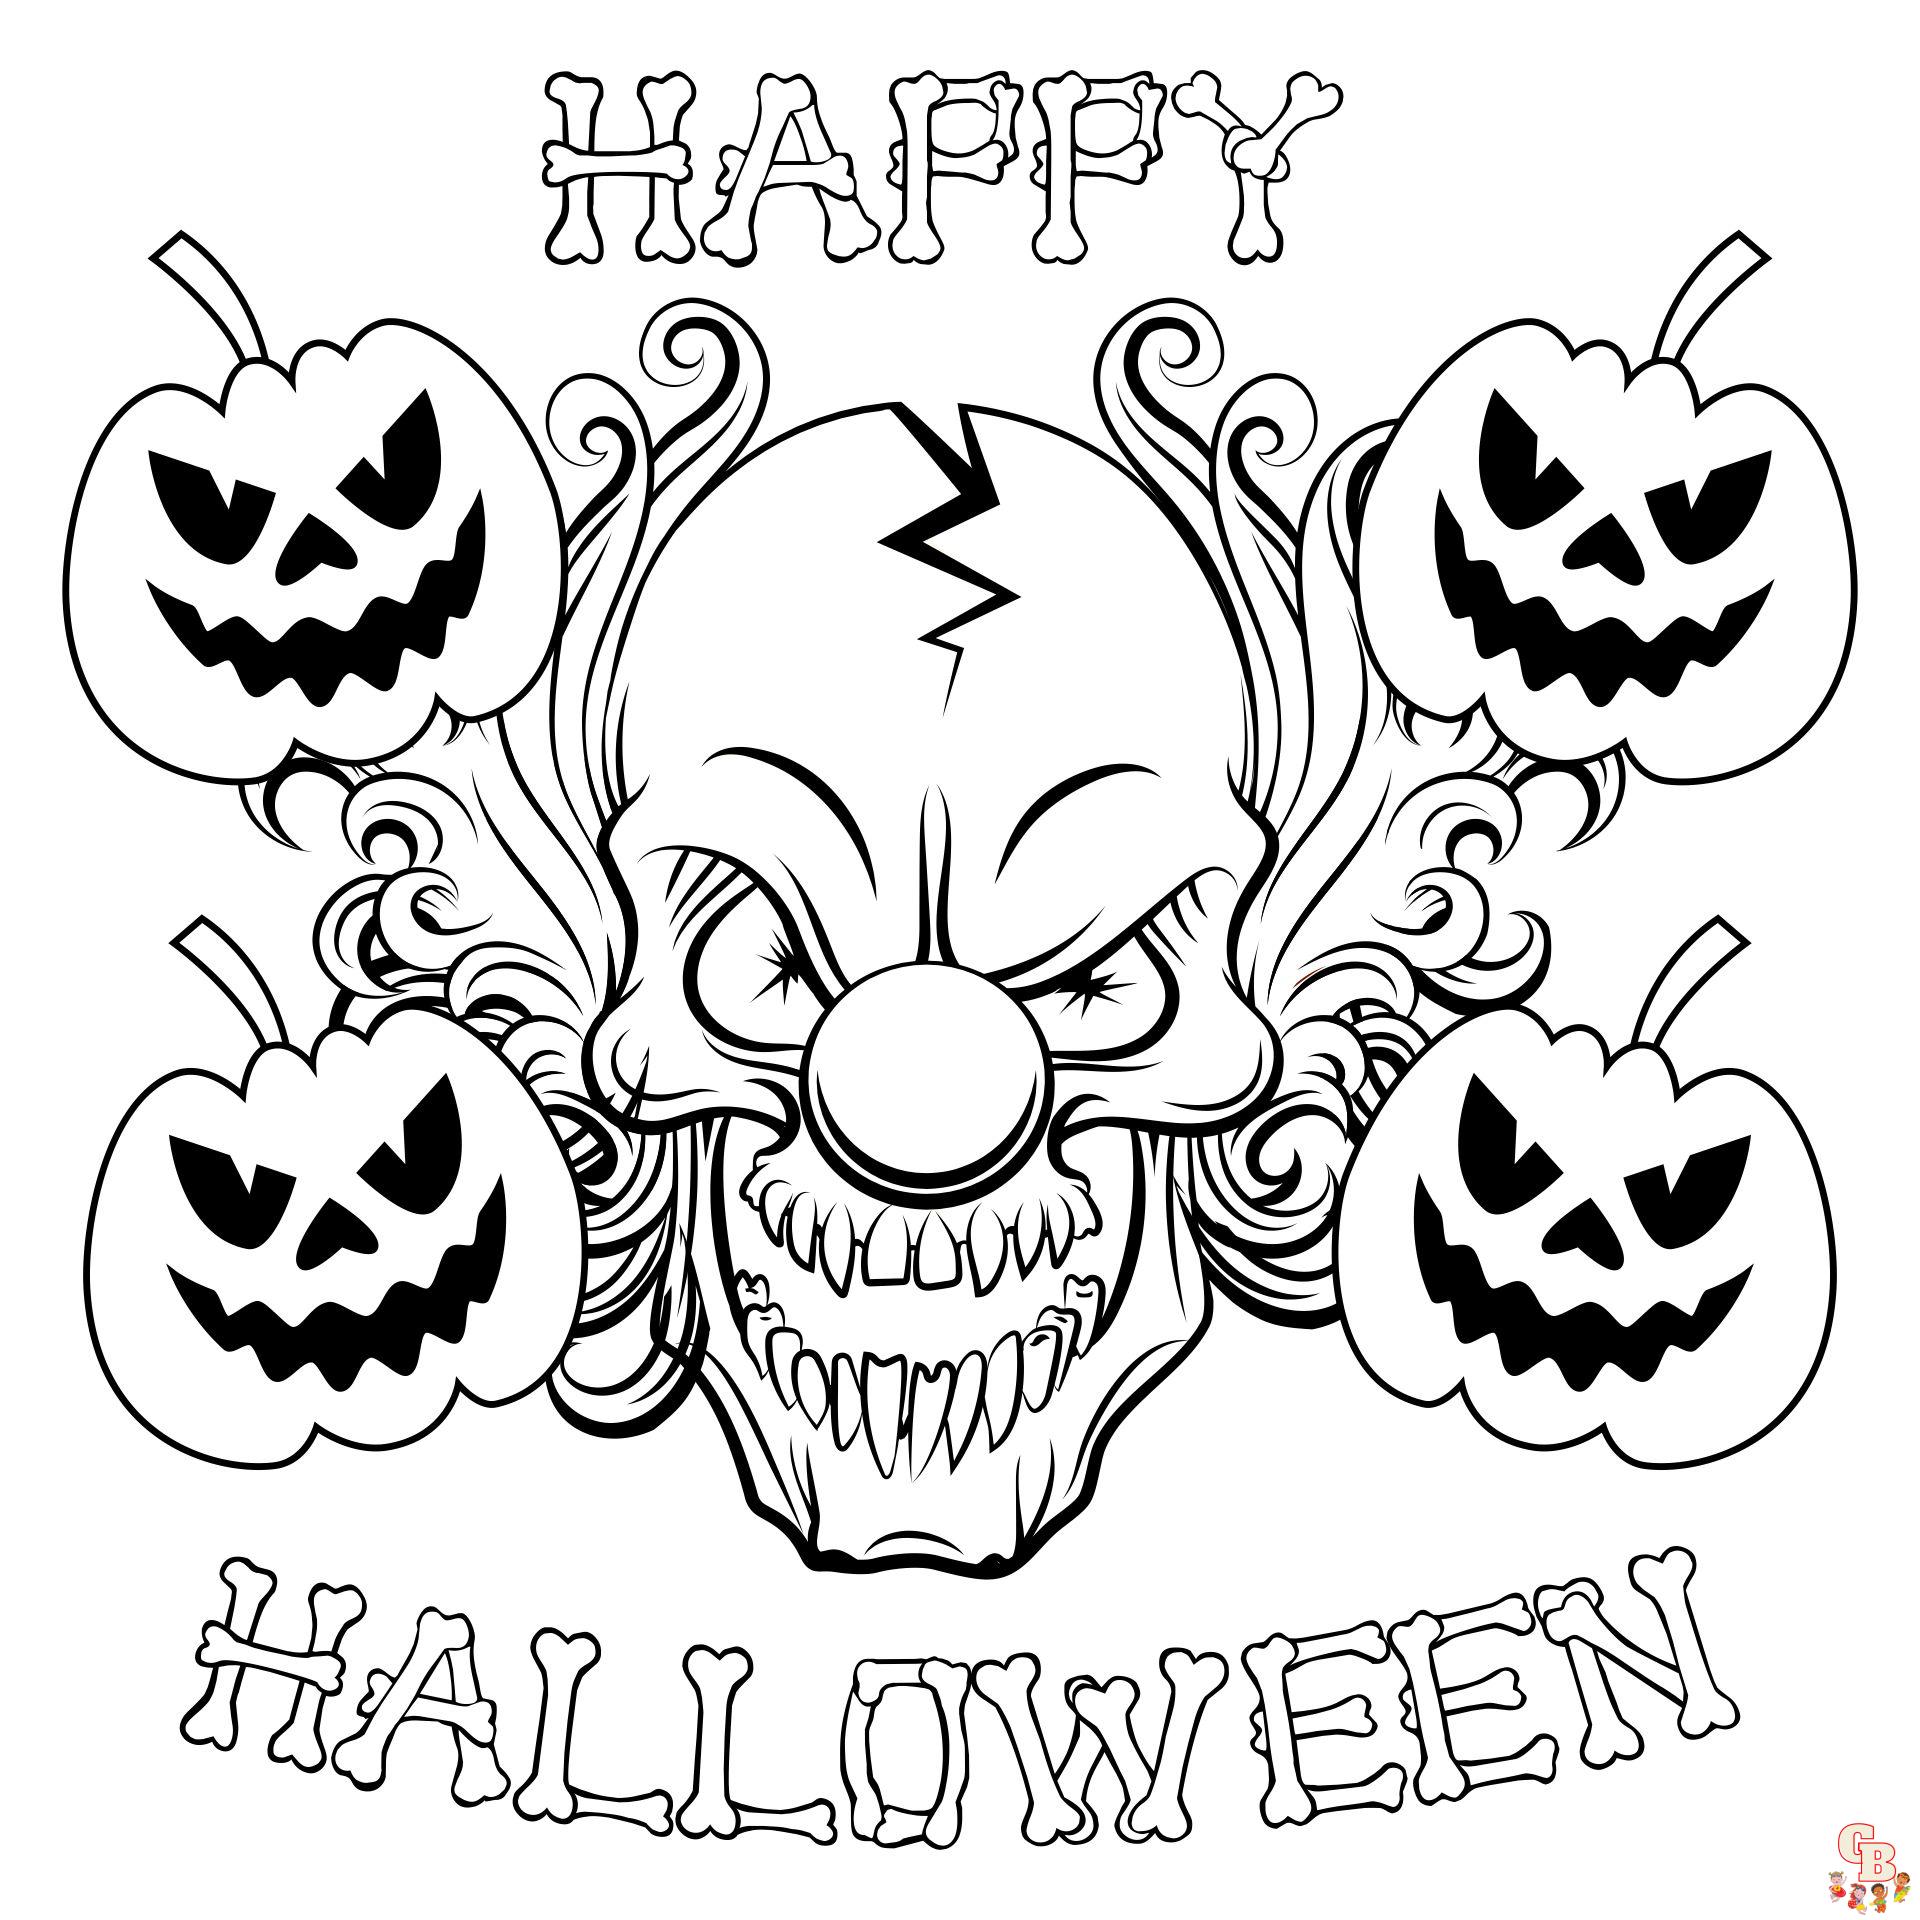 Spooky fun with scary halloween coloring pages